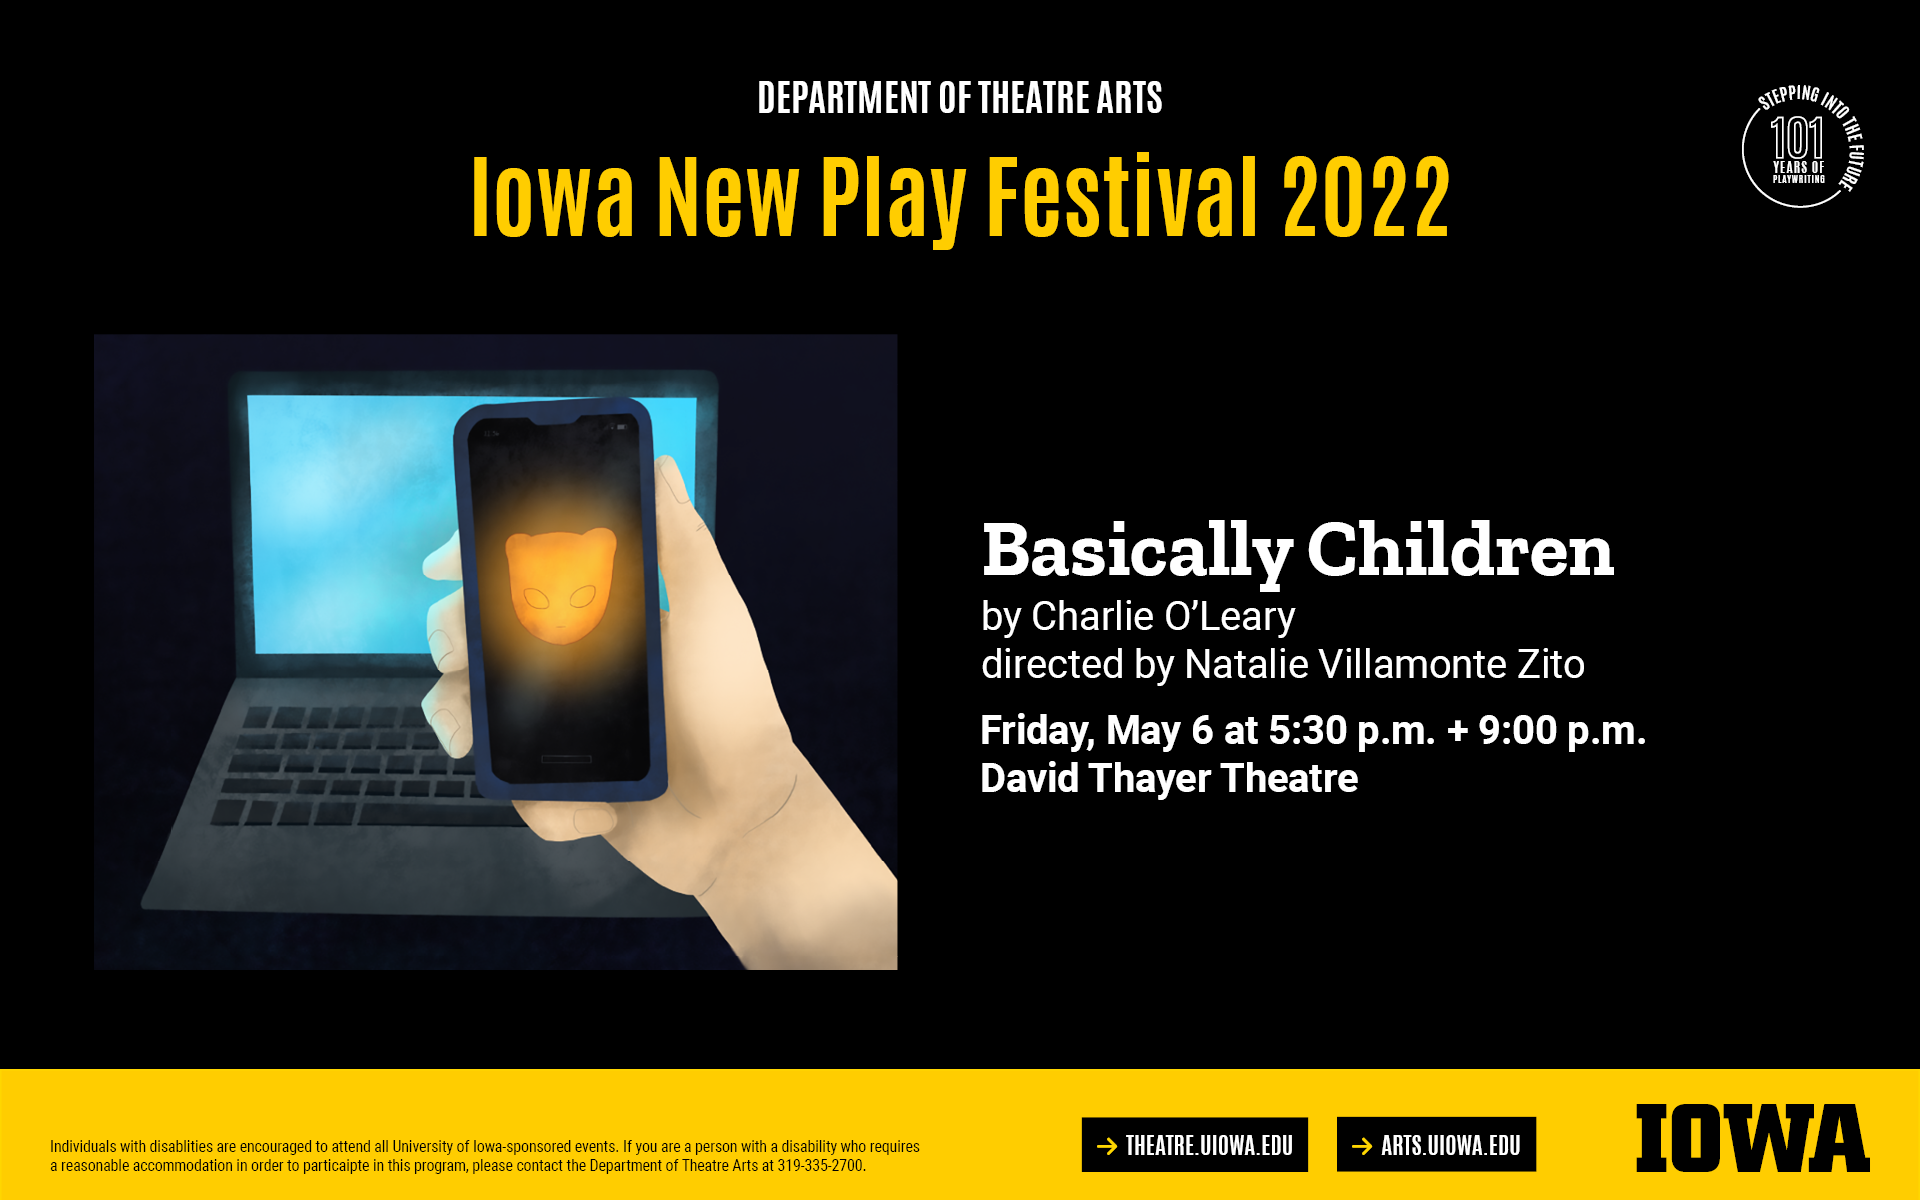 Iowa New Play Festival. Basically Children by Charlie O'Leary, directed by Natalie Villamonte Zito. Friday, May 6 at 5:30PM and 9PM, David Thayer Theatre. Individuals with disablities are encouraged to attend all University of Iowa-sponsored events. If you are a person with a disability who requires  a reasonable accommodation in order to particaipte in this program, please contact the Department of Theatre Arts at 319-335-2700.